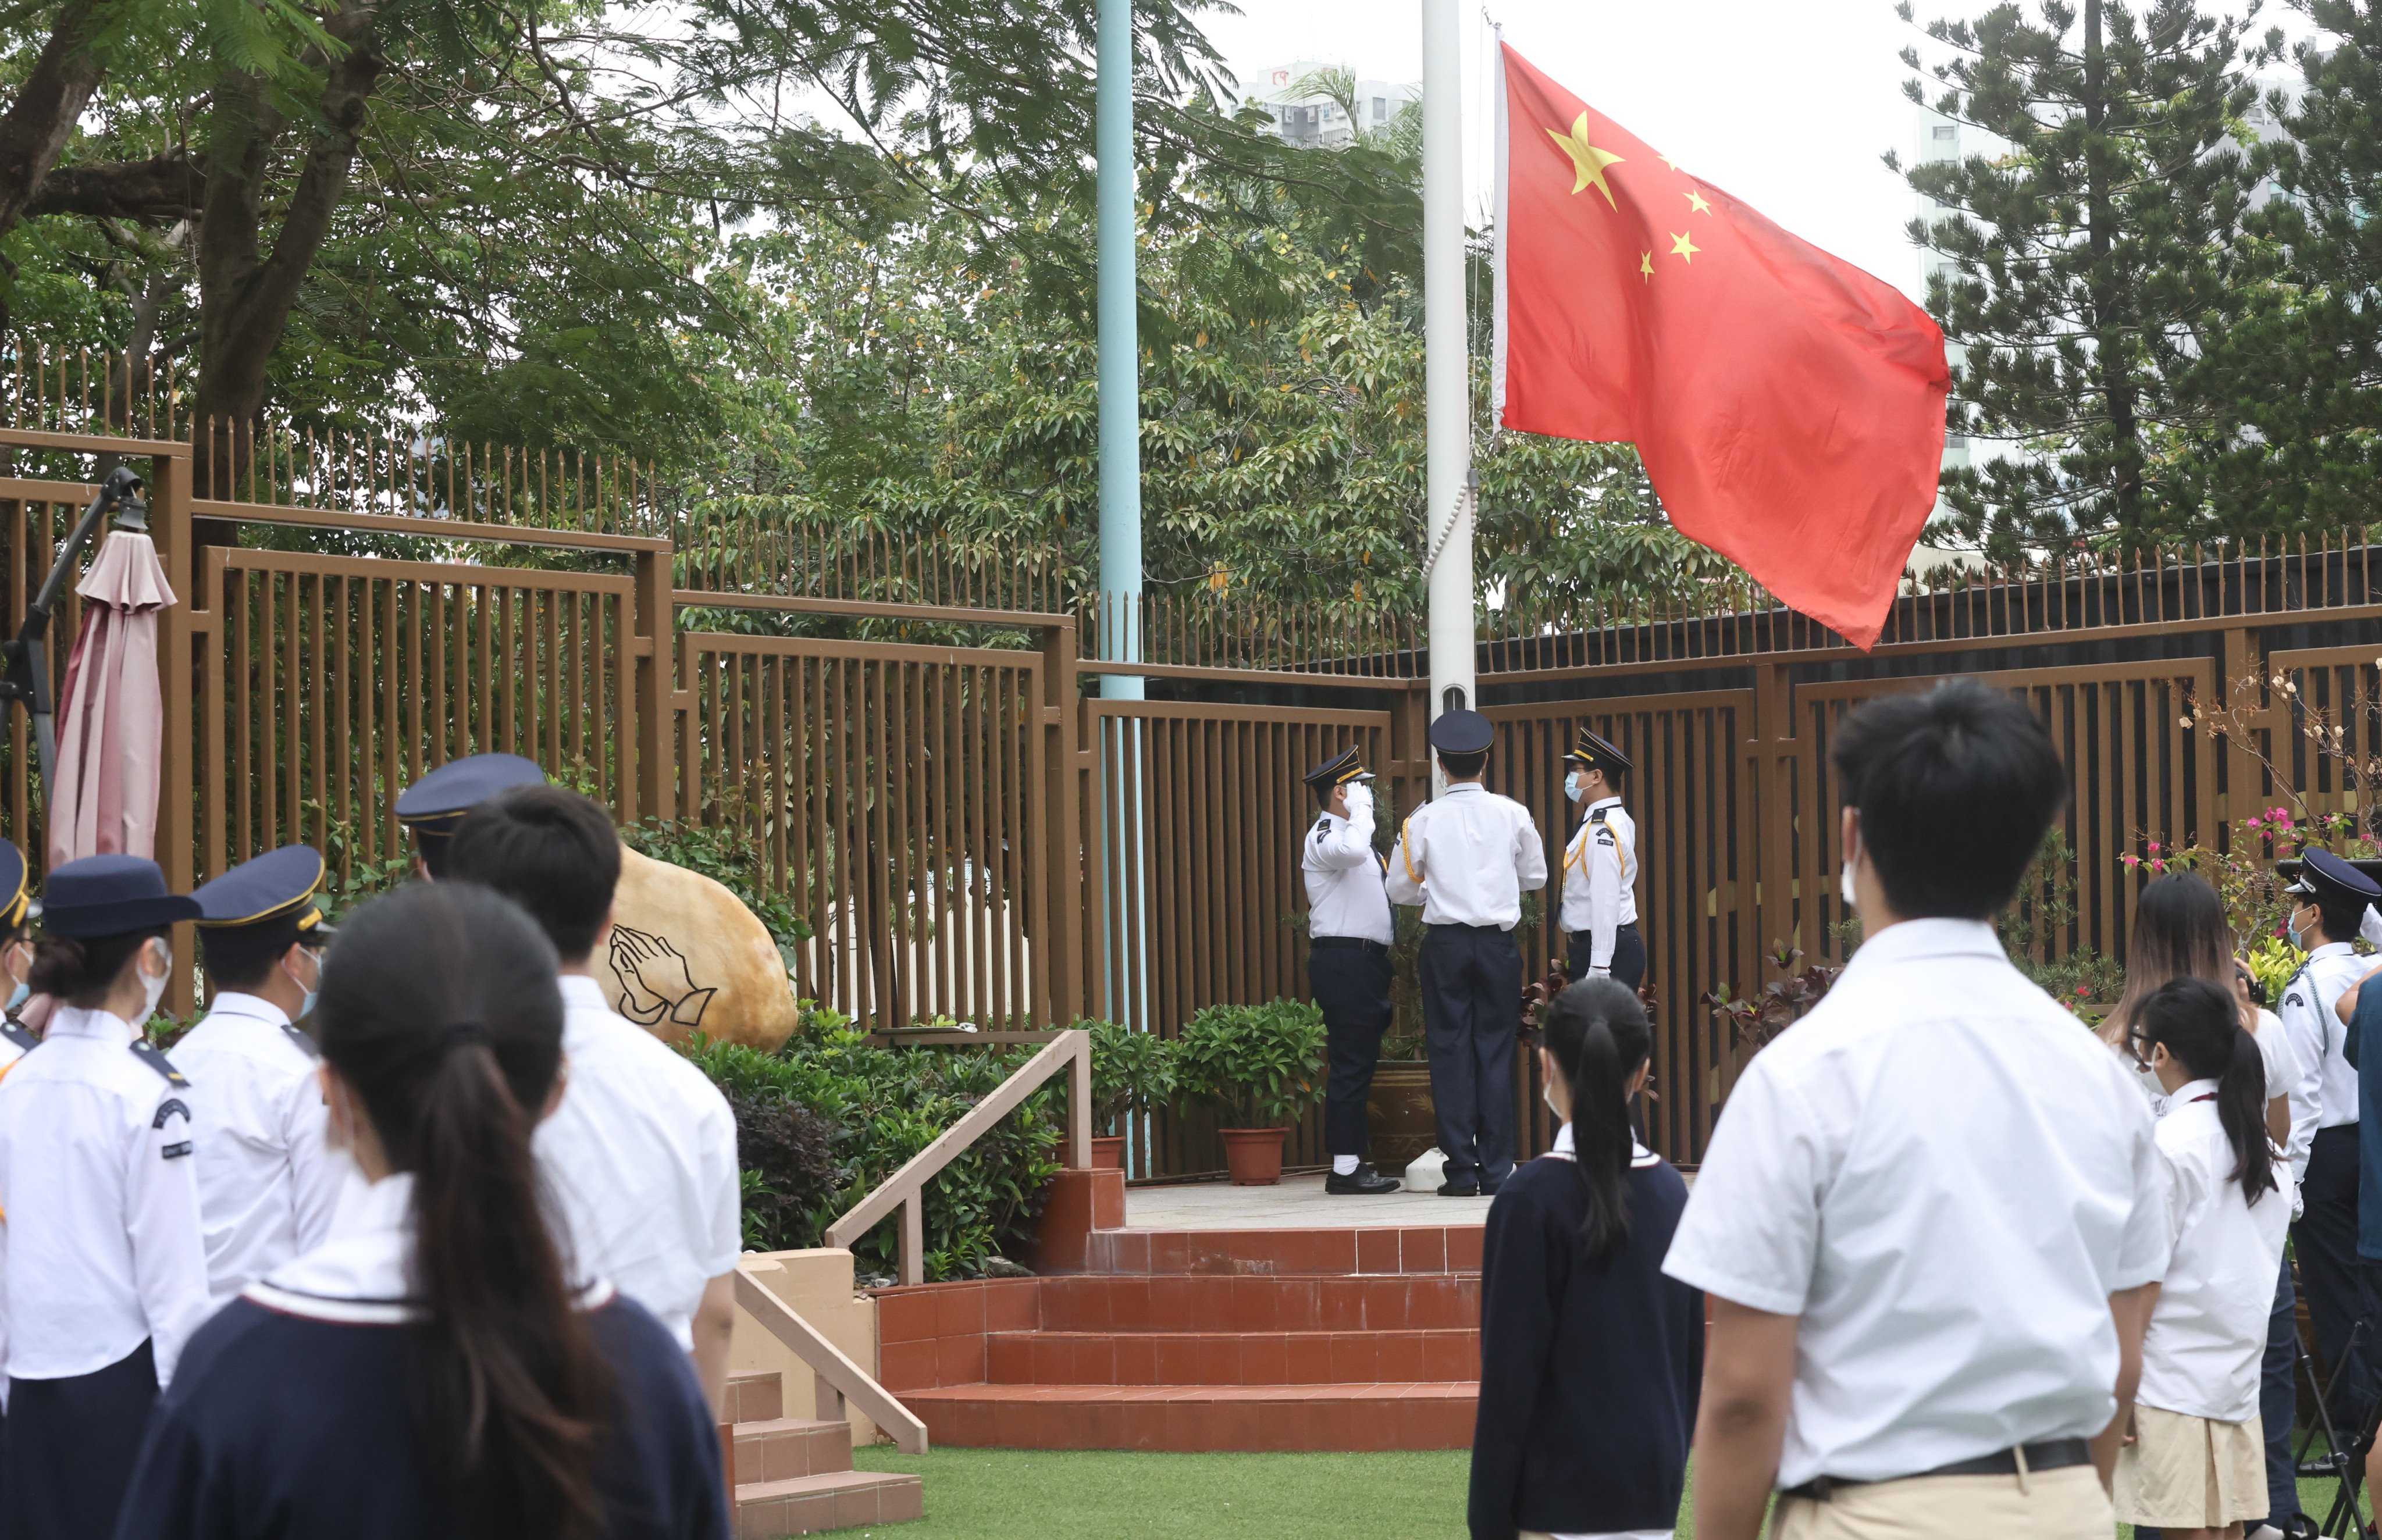 Students at Gertrude Simon Lutheran College attend a flag-raising ceremony during National Security Education Day earlier this week. Photo: K. Y. Cheng